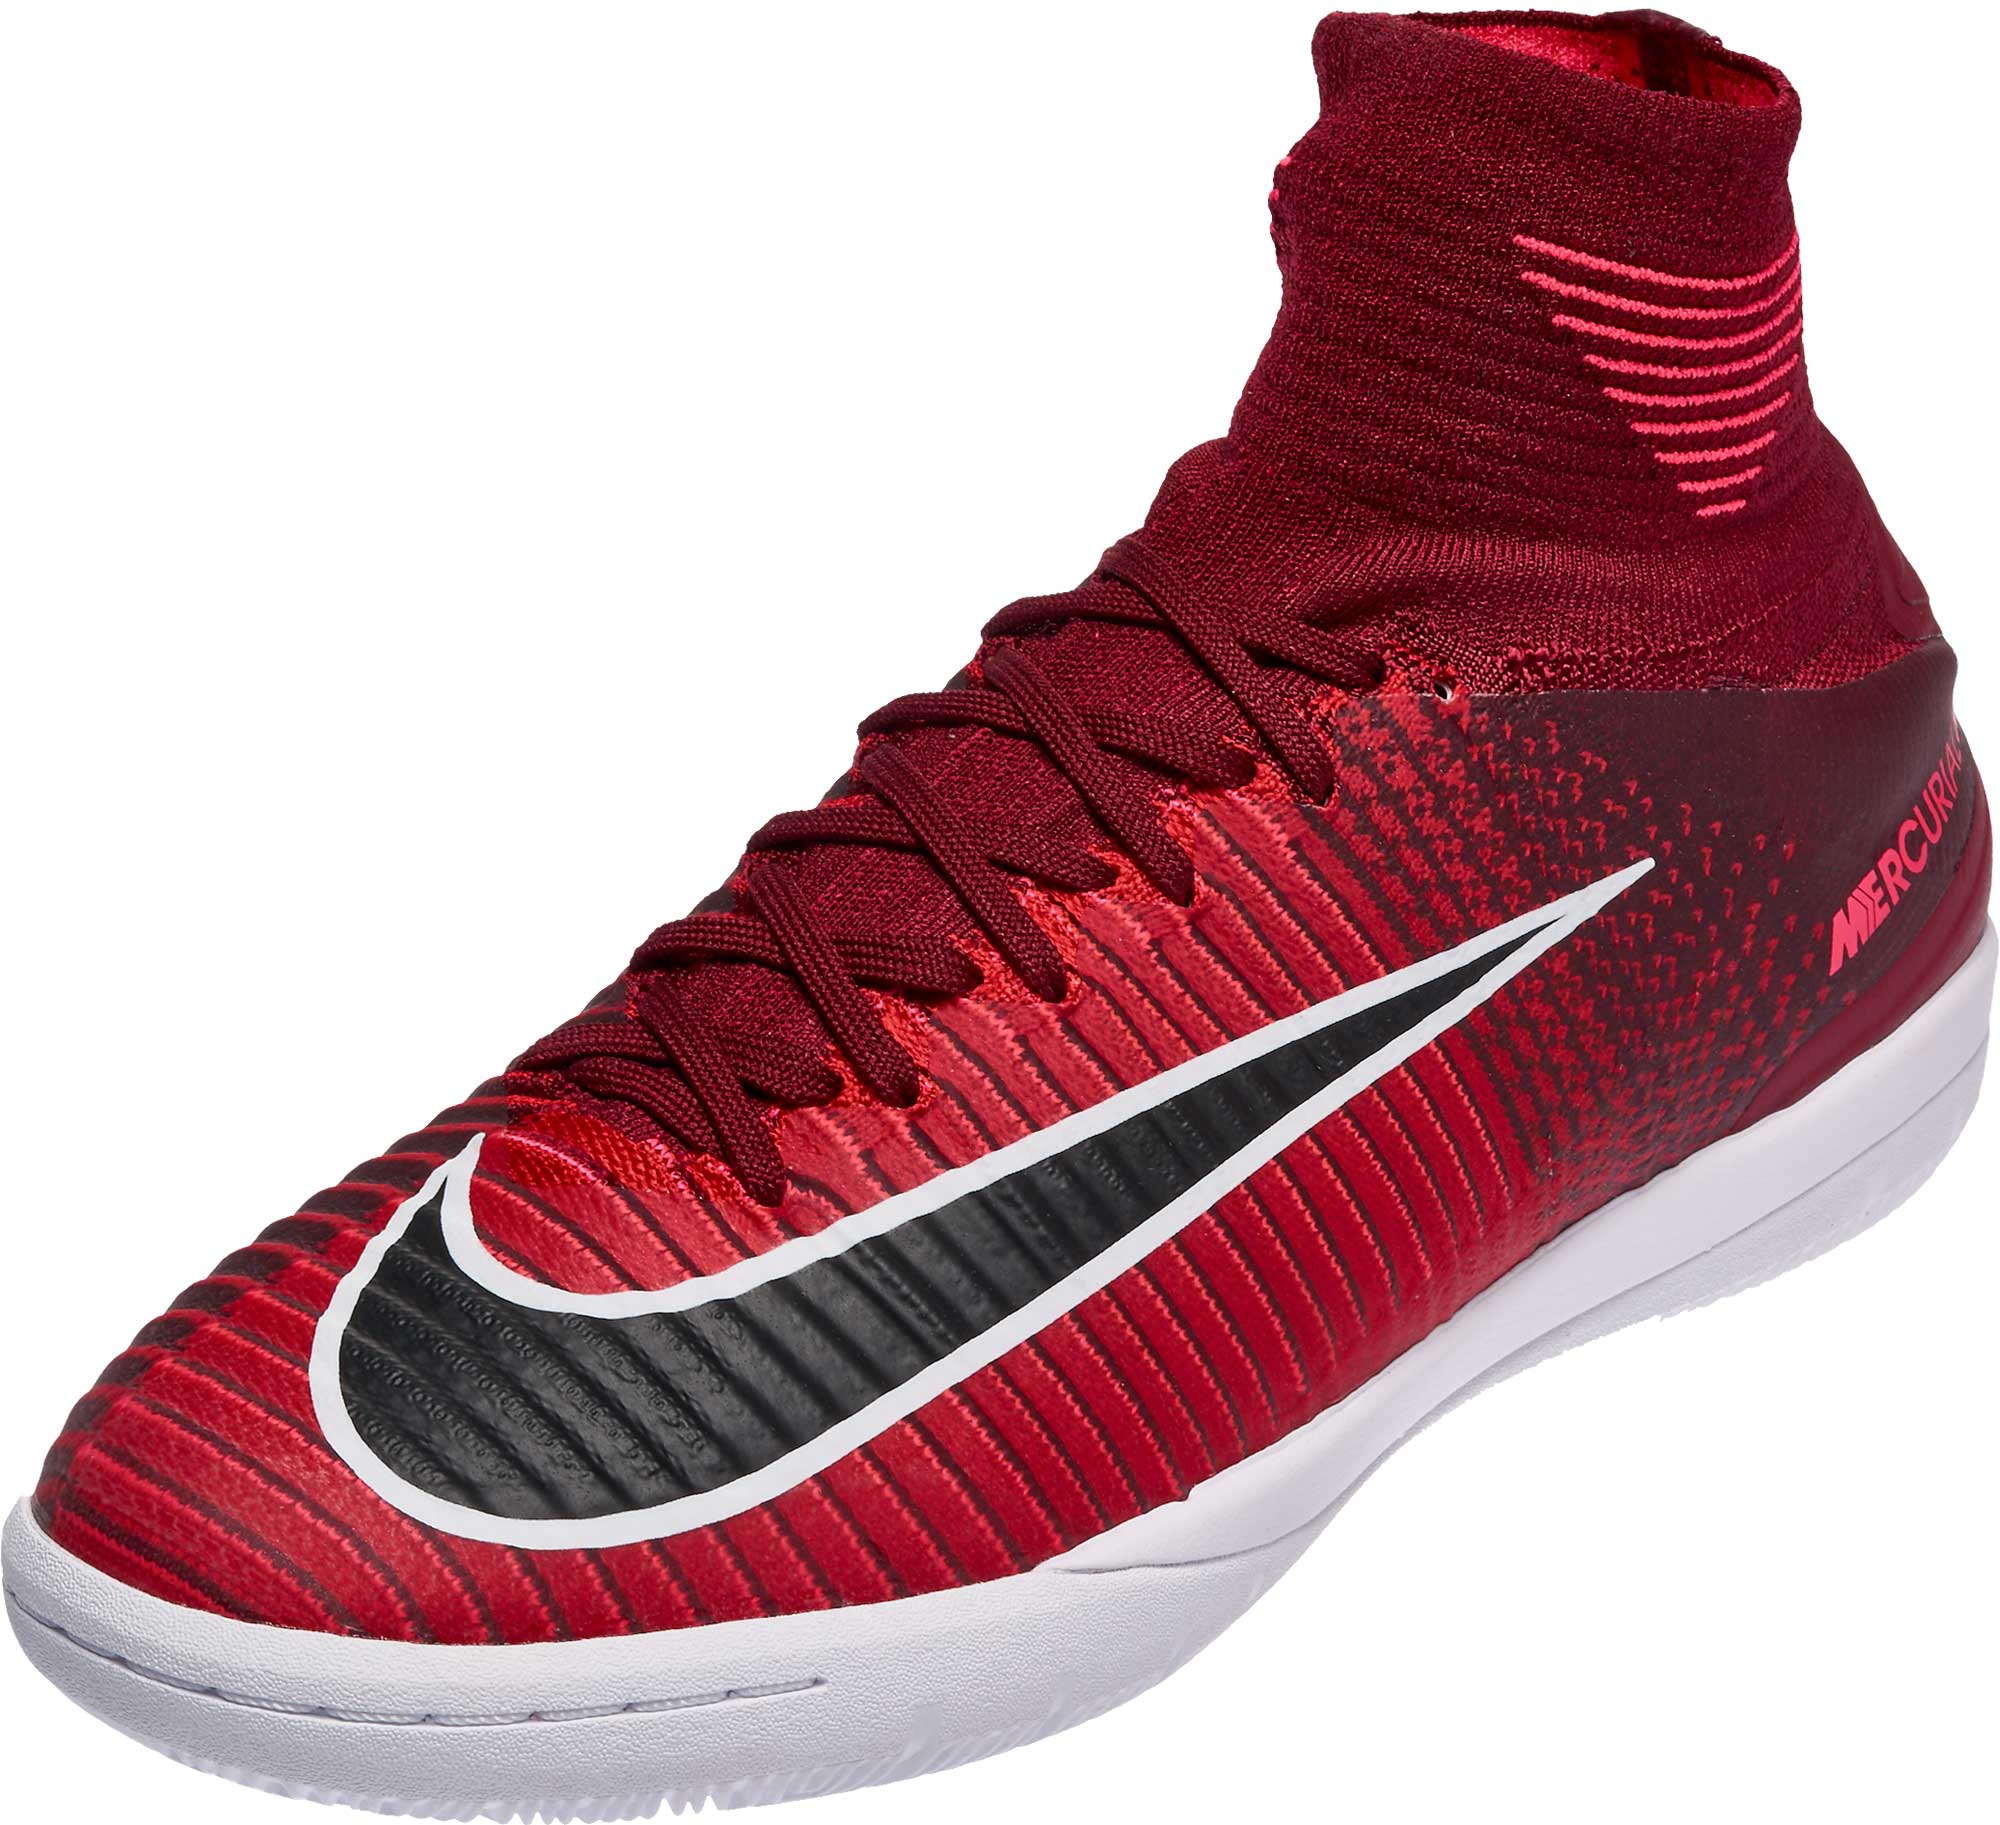 MercurialX Proximo II - Red Indoor Soccer Shoes